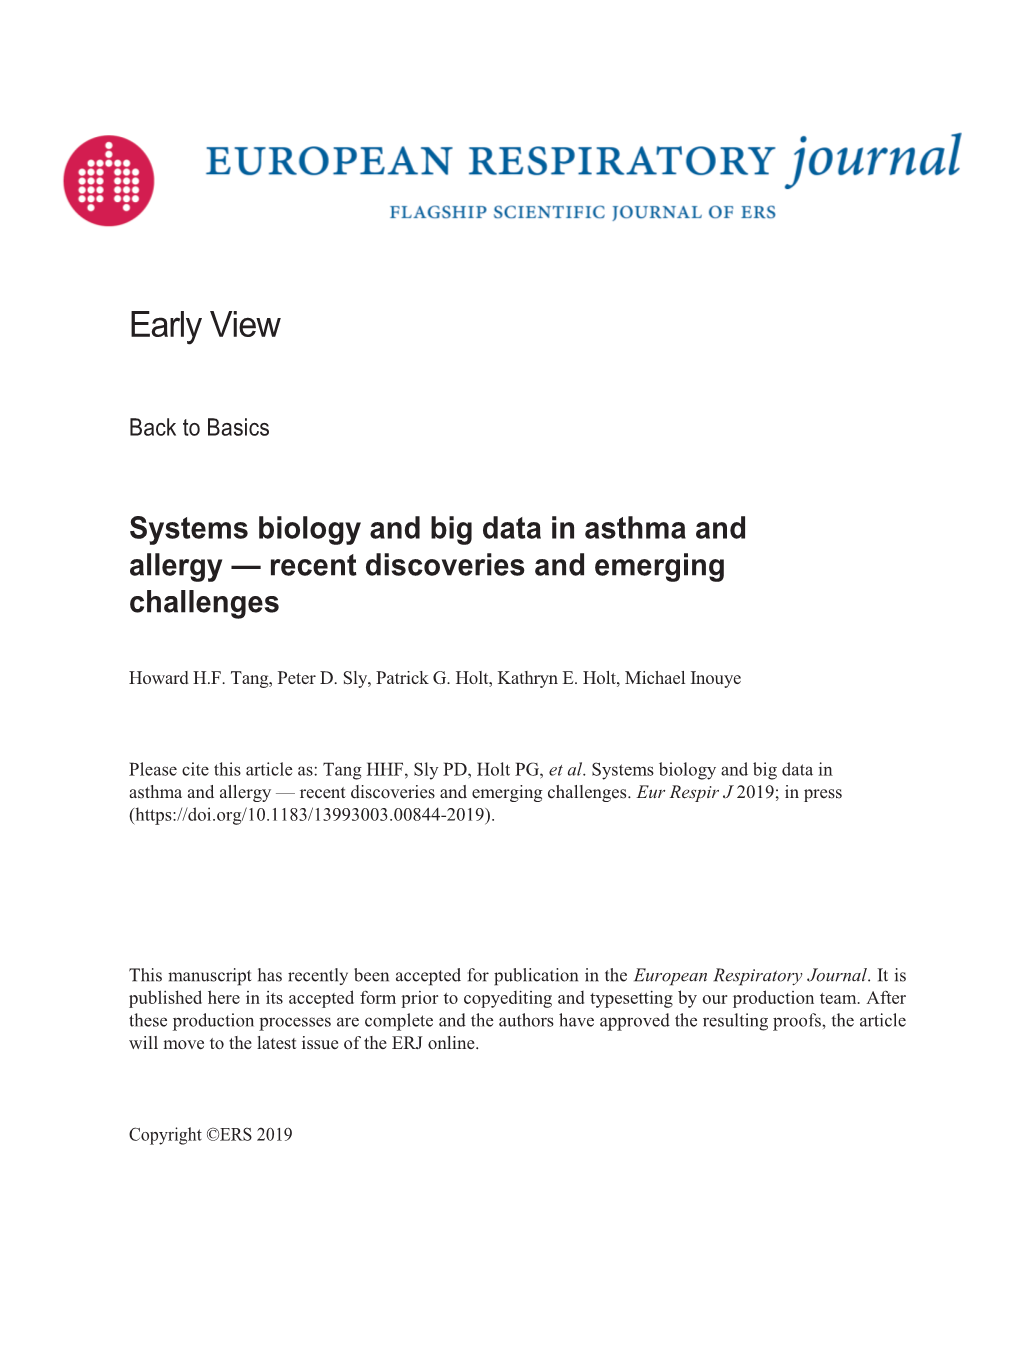 Systems Biology and Big Data in Asthma and Allergy — Recent Discoveries and Emerging Challenges